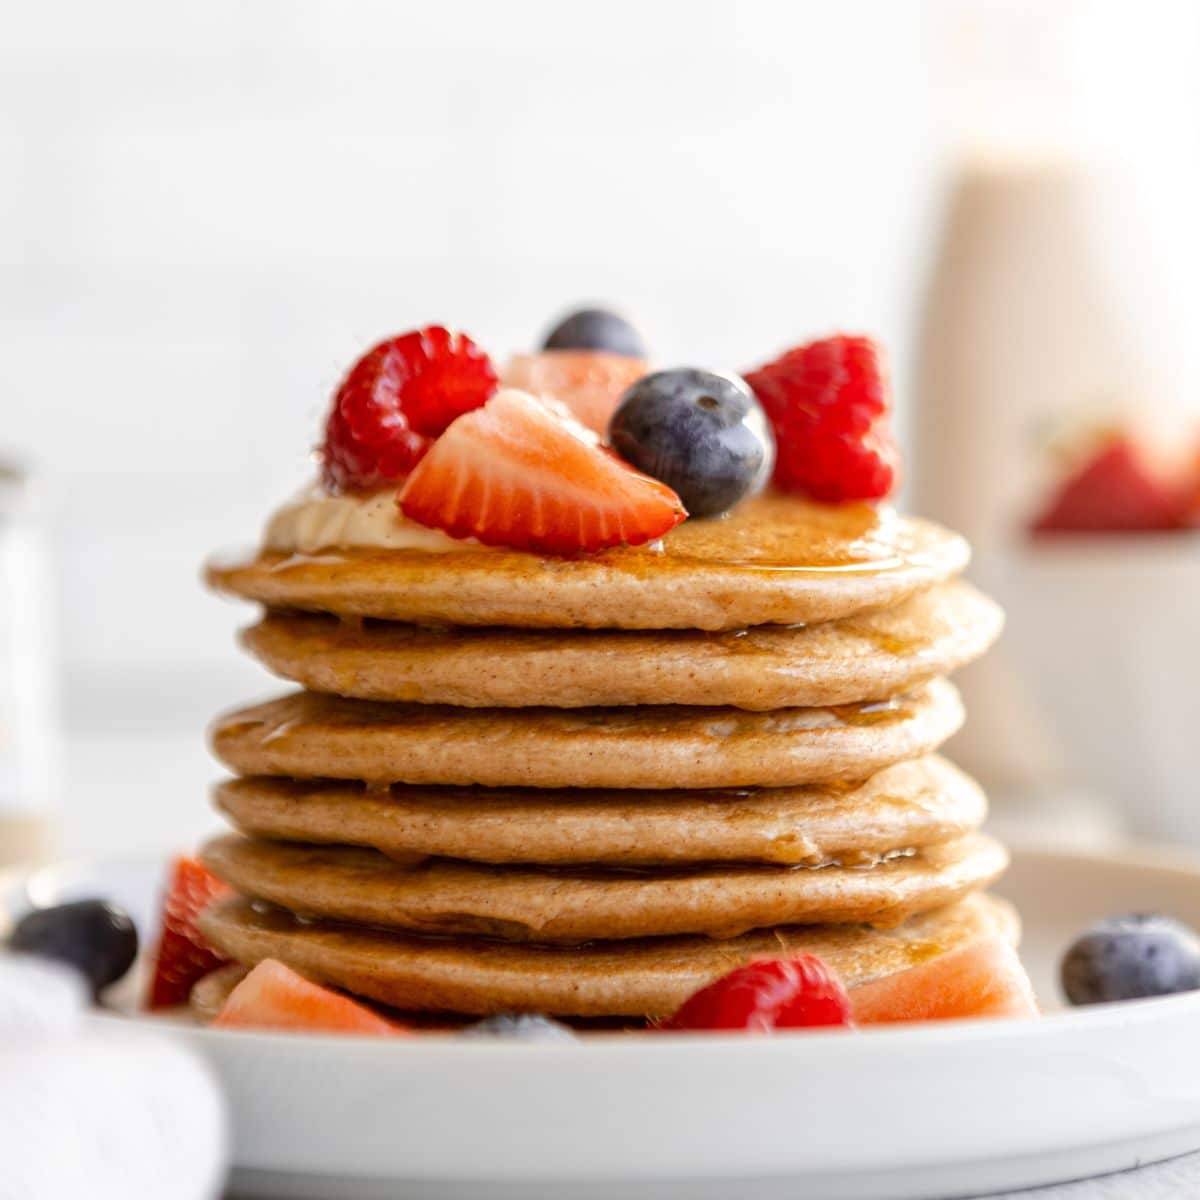 Cottage Cheese Pancakes made with four healthy ingredients and crazy delicious. They're low calorie, gluten free and super simple to make. These protein pancakes are soon to be your new everyday breakfast favorite!